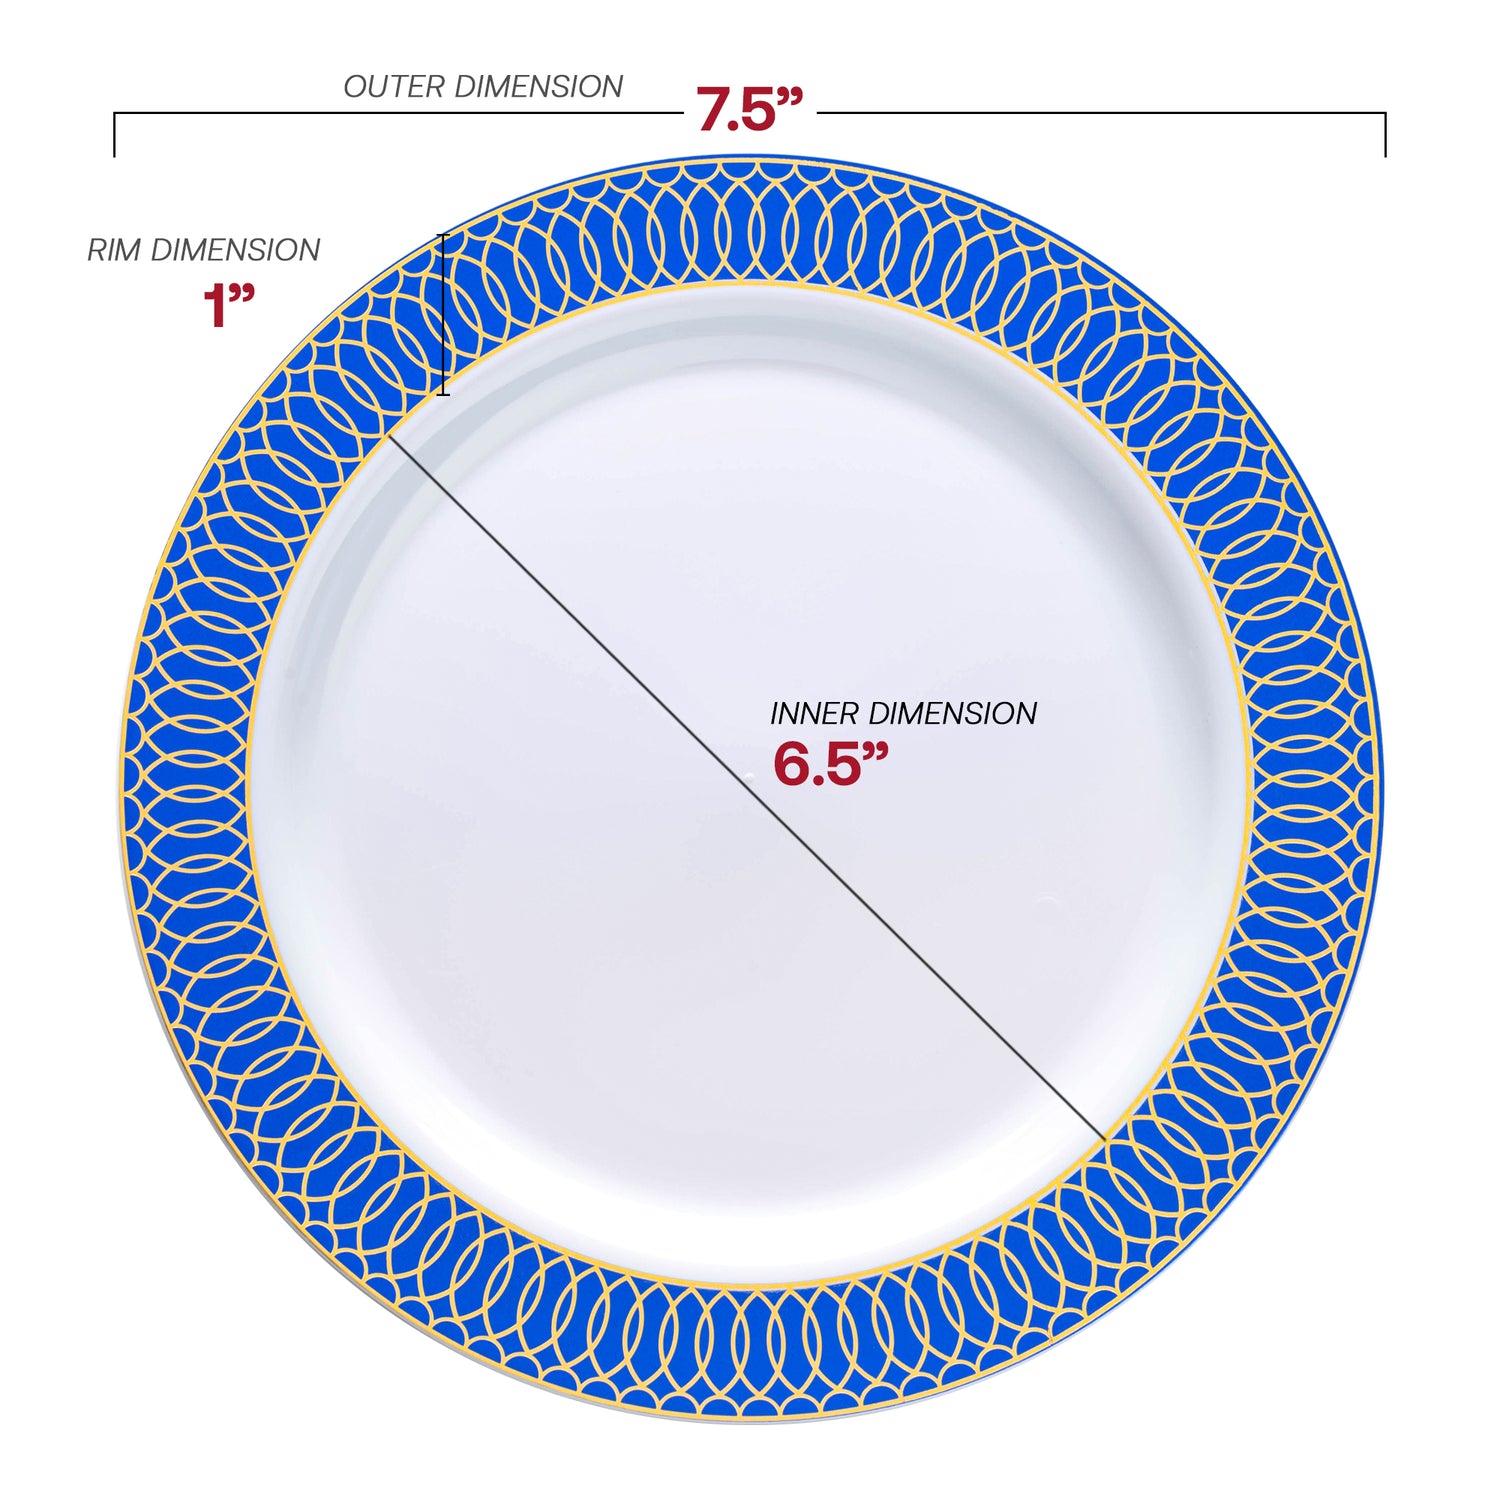 White with Gold Spiral on Blue Rim Plastic Appetizer/Salad Plates (7.5") Dimension | The Kaya Collection